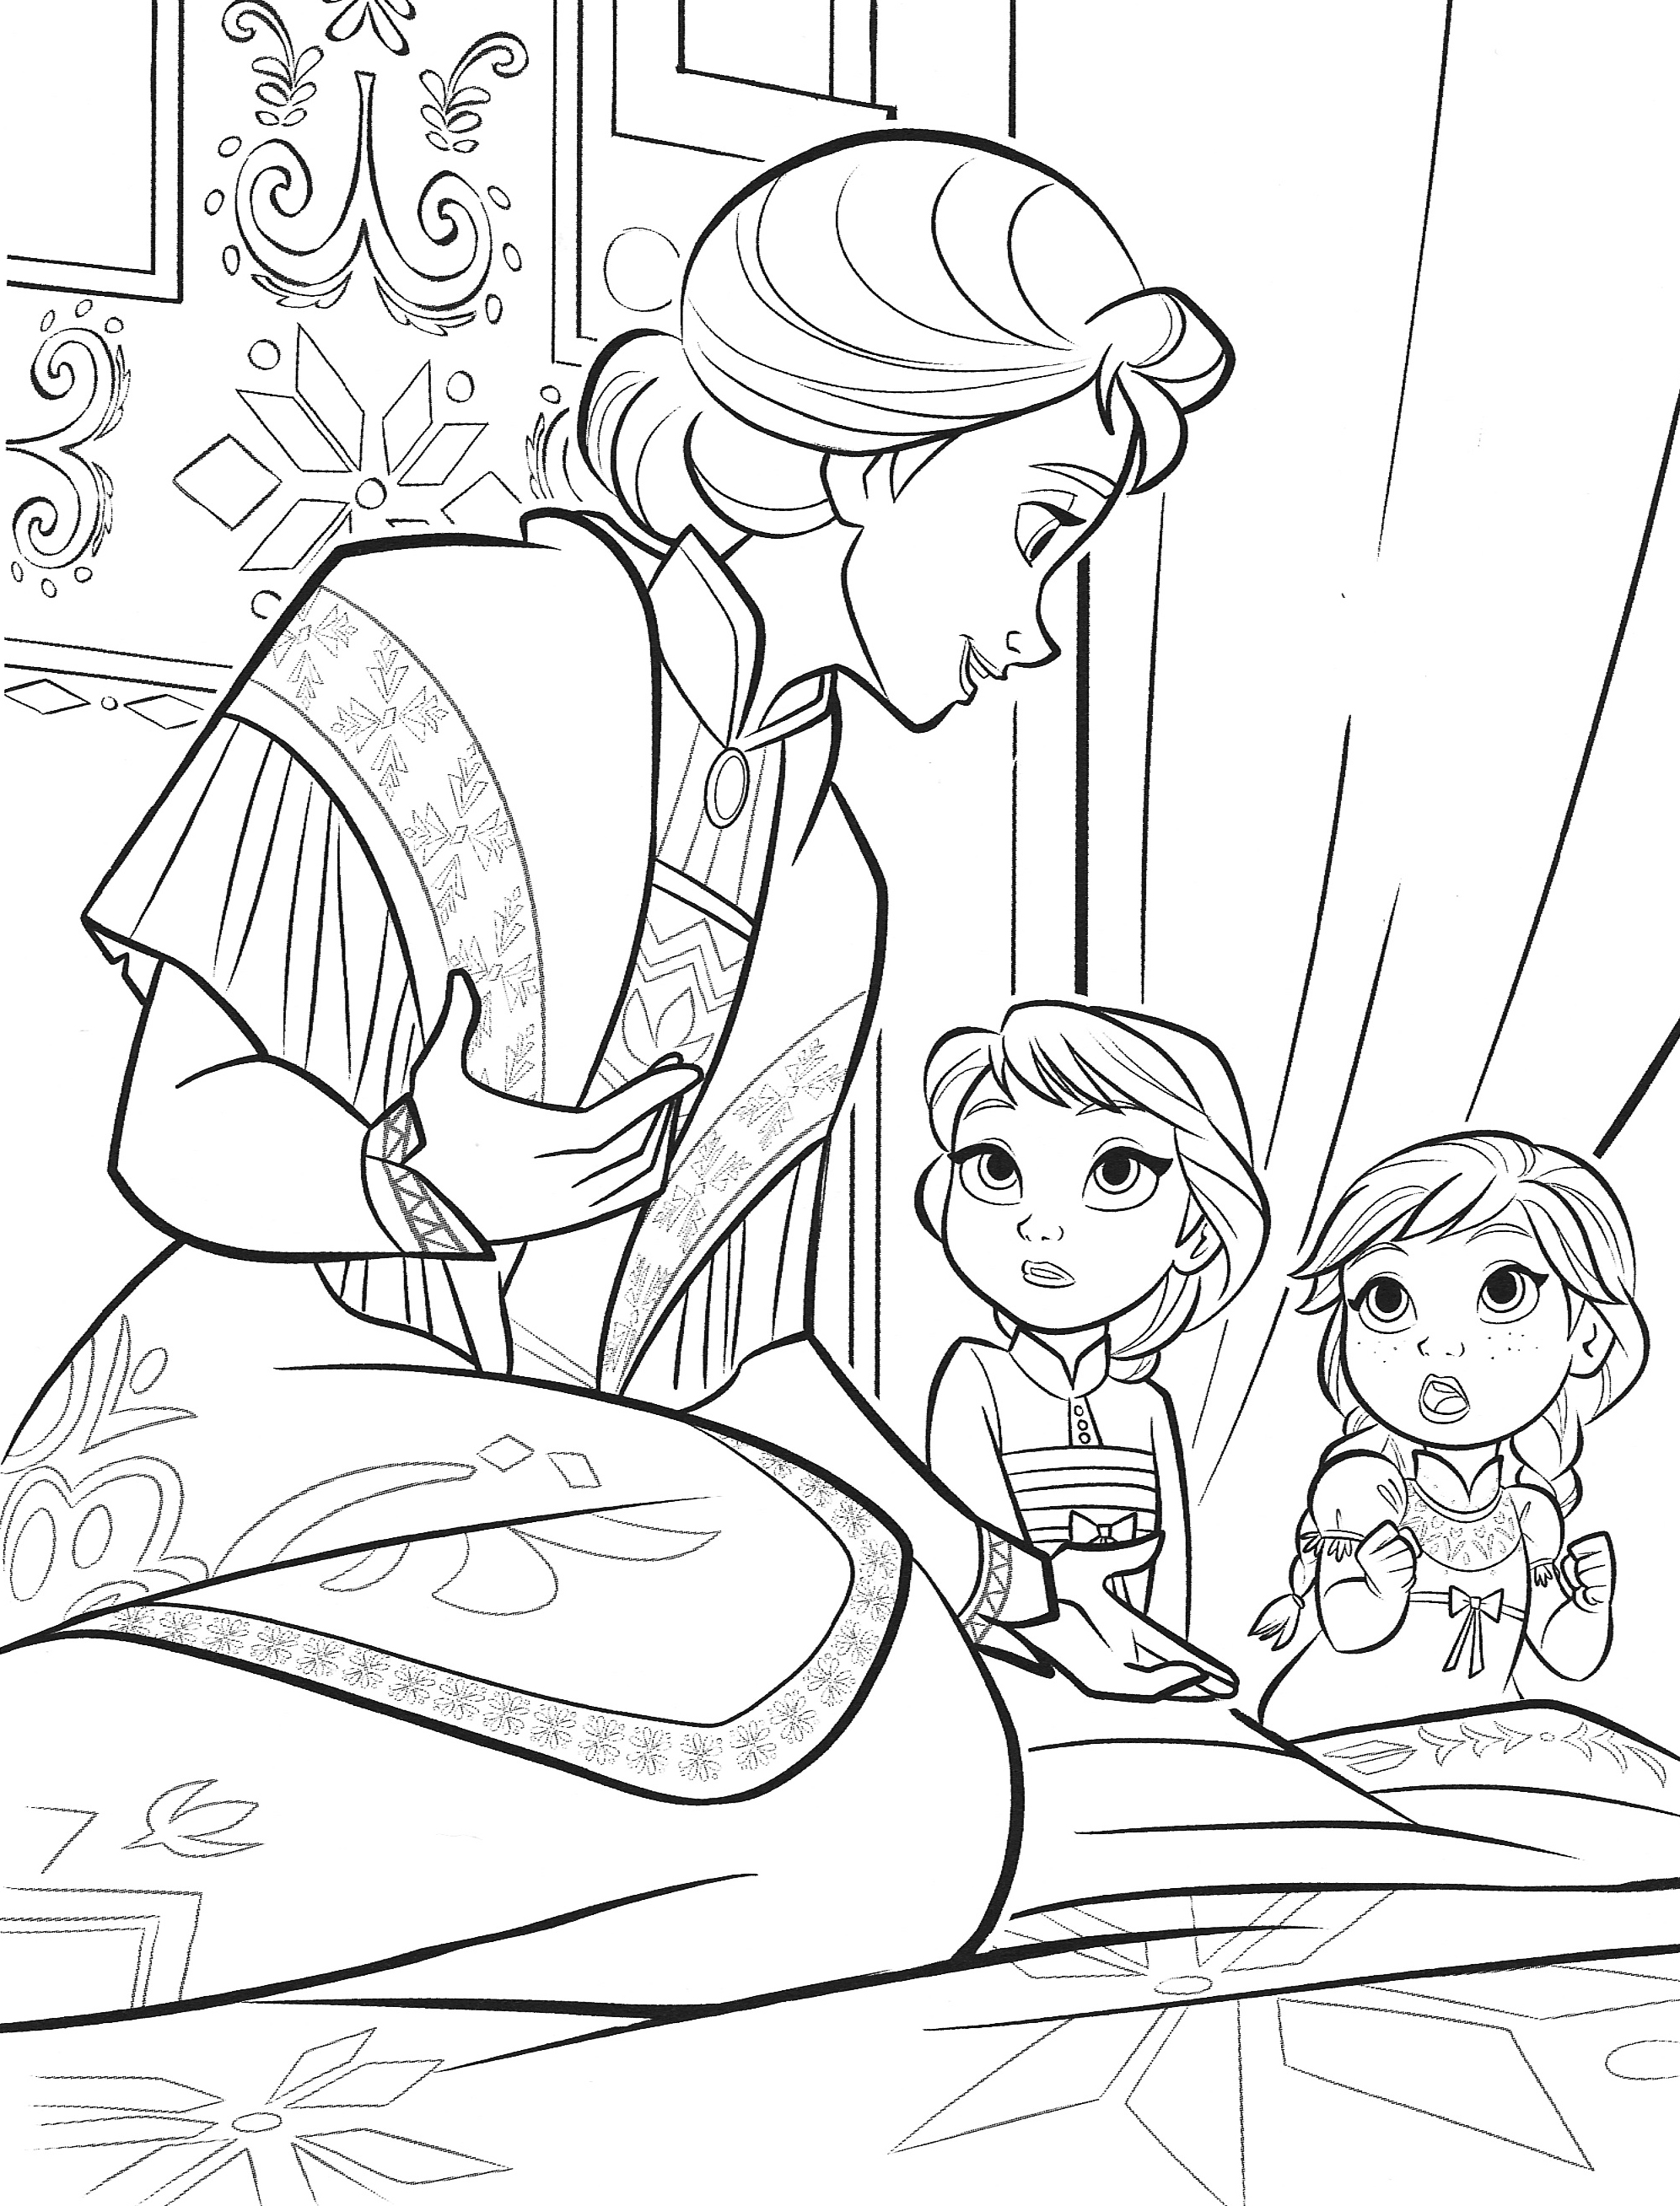 download-elsa-and-anna-coloring-pages-images-color-pages-collection